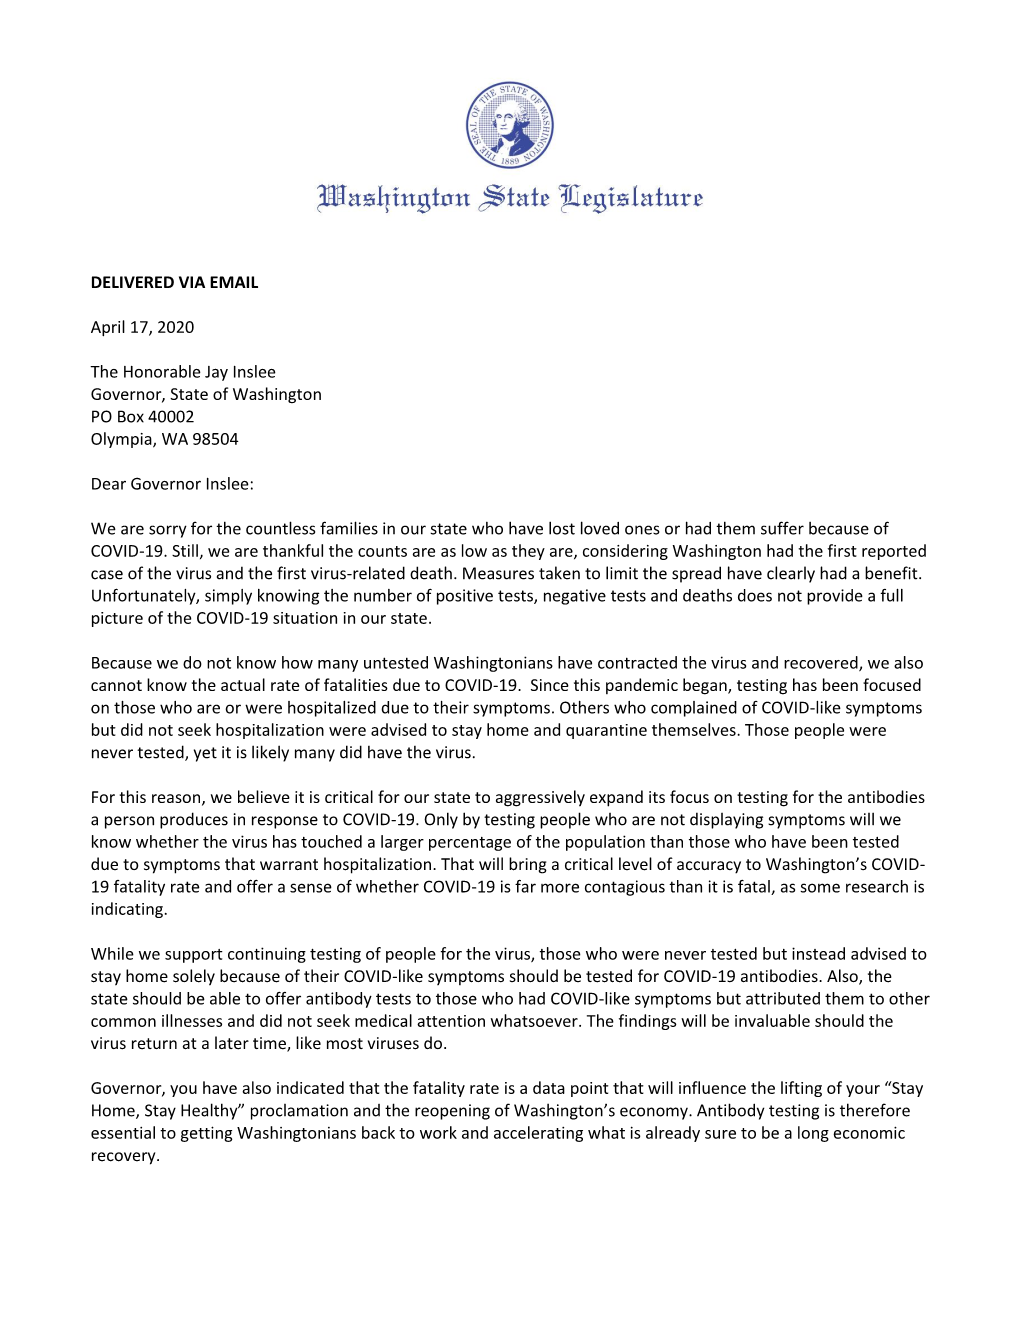 DELIVERED VIA EMAIL April 17, 2020 the Honorable Jay Inslee Governor, State of Washington PO Box 40002 Olympia, WA 98504